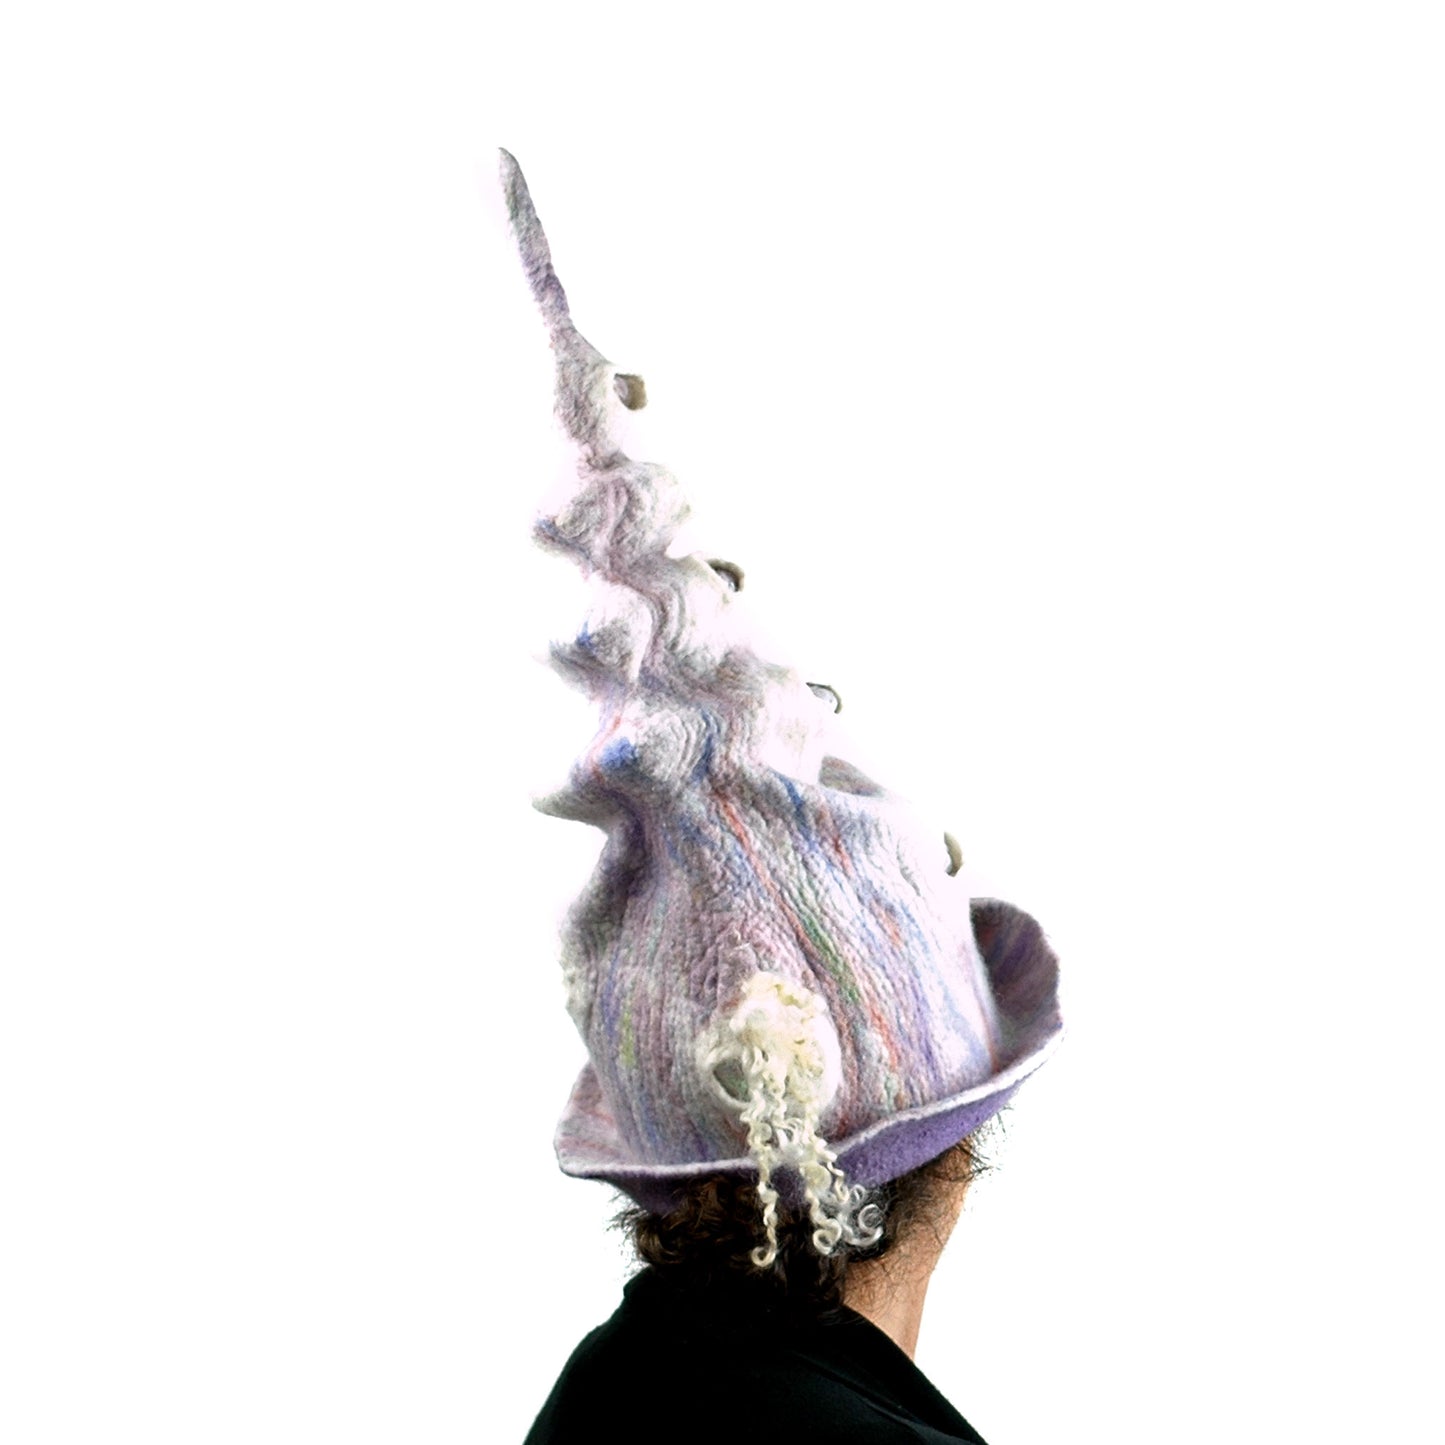 Pale Purple, Pastel Colored, Felted Unicorn Hat - back view